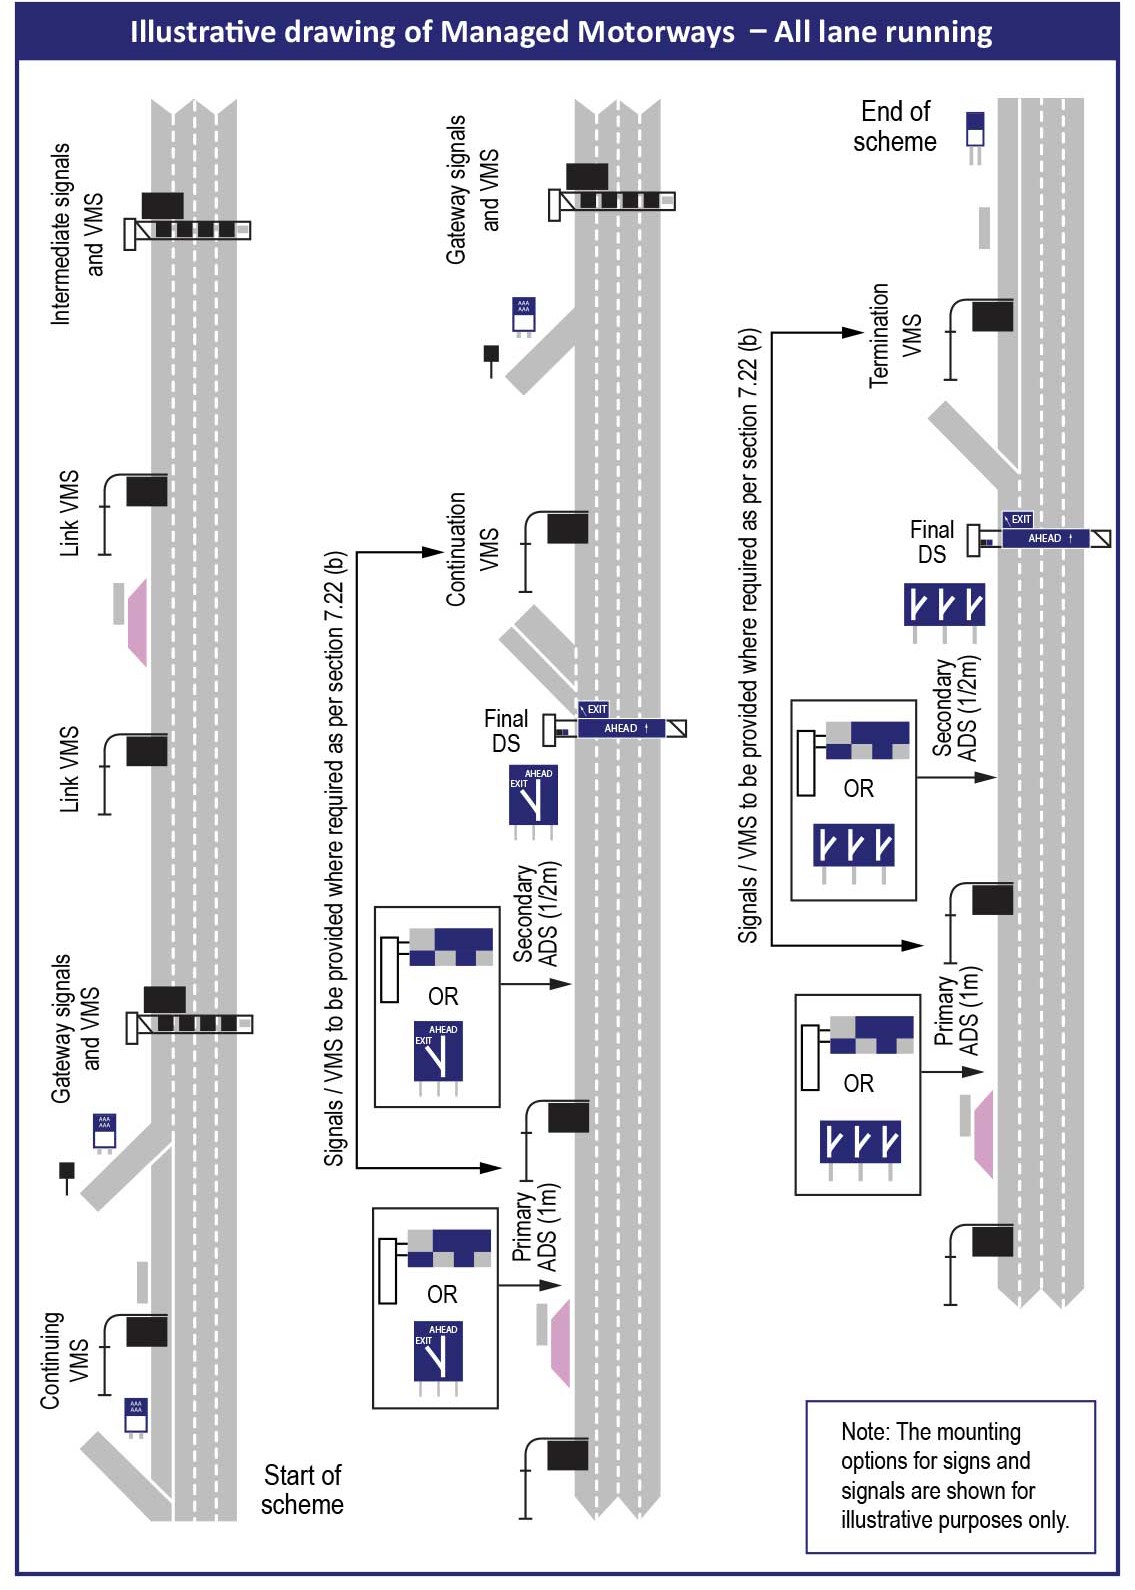 Schematic drawing of sign layout for the UK all lane running concept for management motorways. Schematic shows a stretch of roadway with full gantries (across all lanes) at a few locations with intermediate verge / side mounted signs located in between the full gantry locations. Refuge areas are also shown.